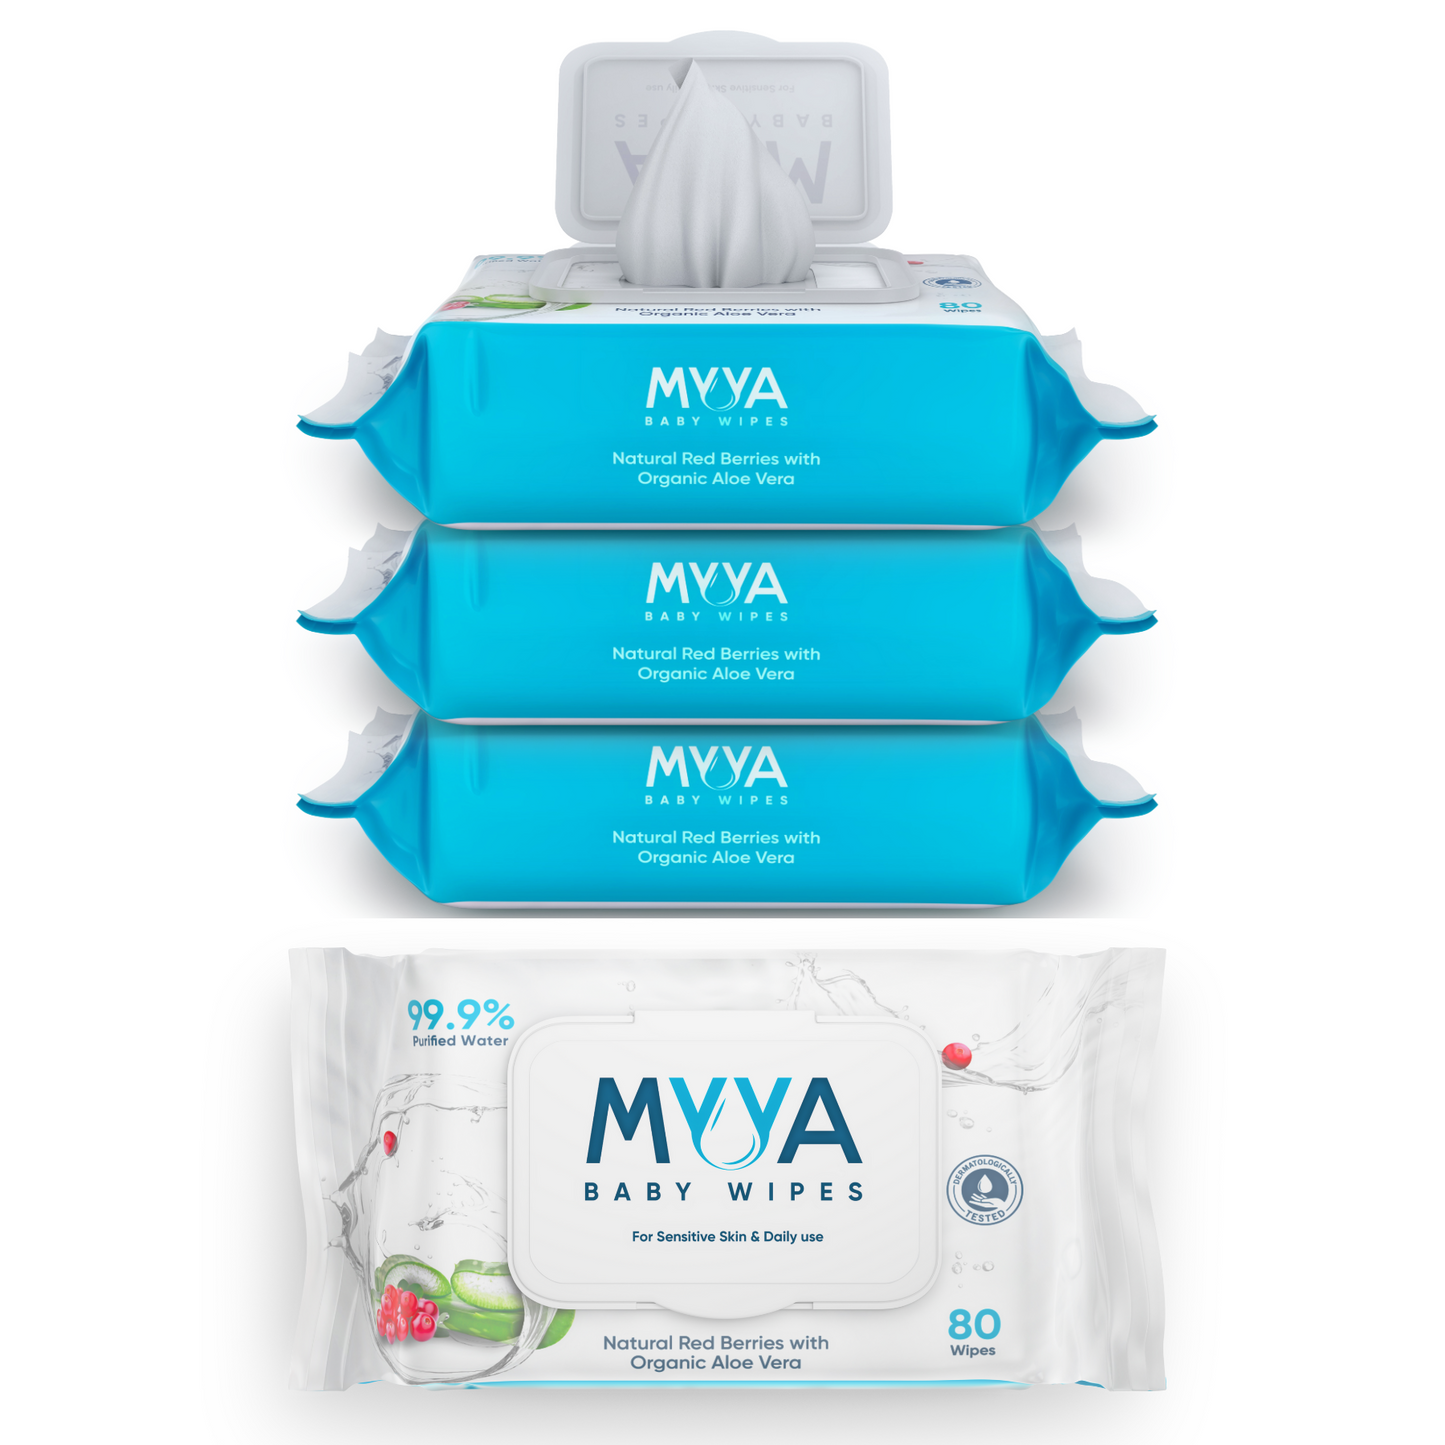 Myya Organic Baby Wipes - Pack of 3 with 80 wipes per pack